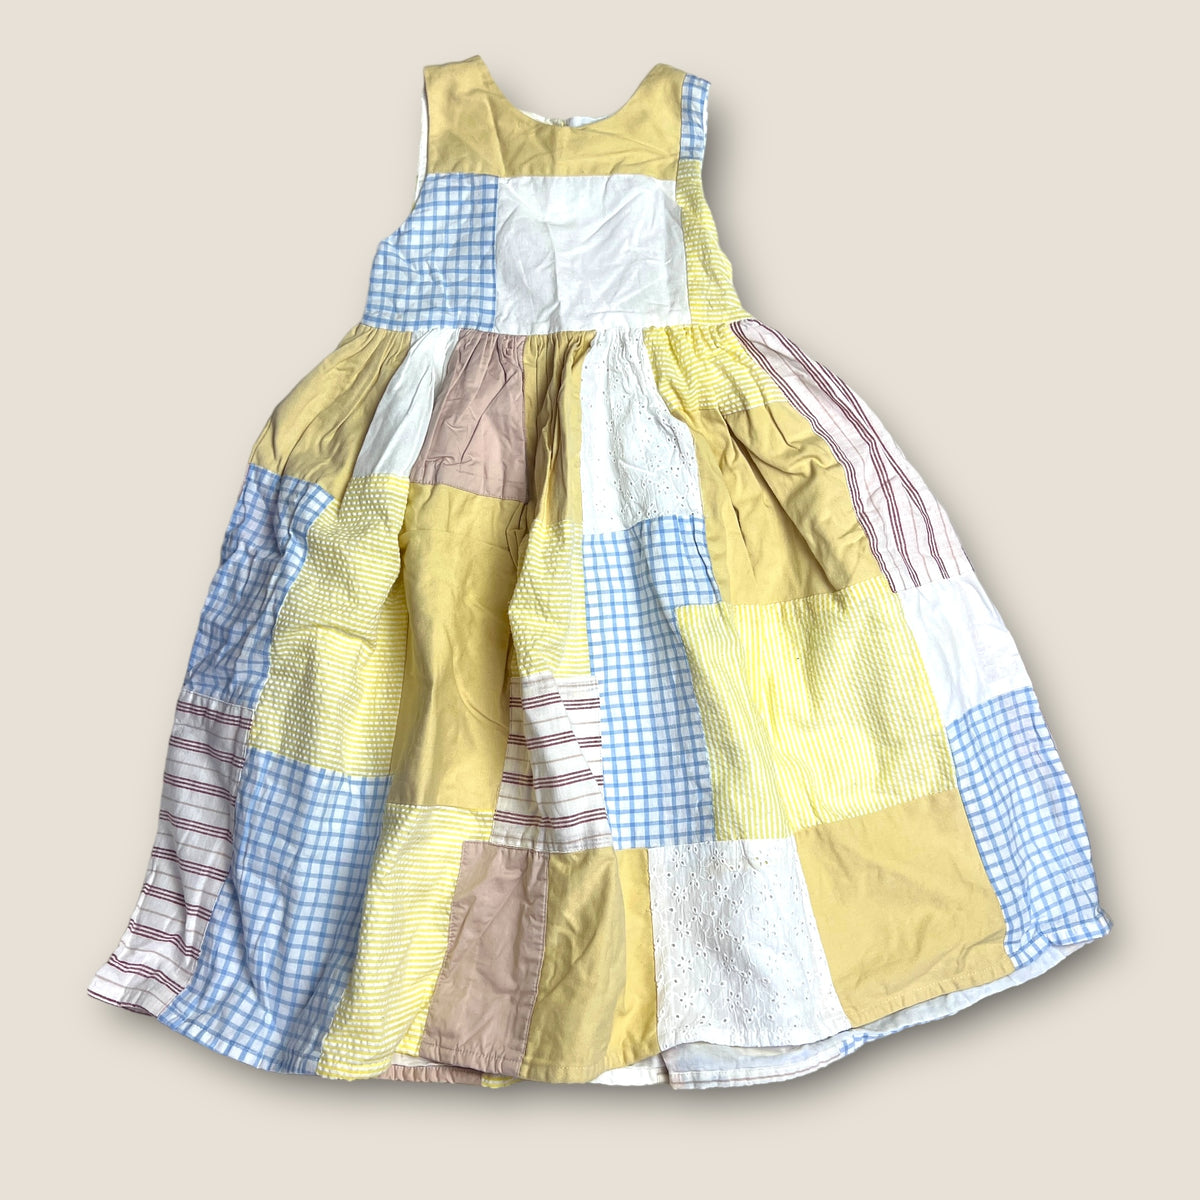 Daughter Dress size 5-6 years